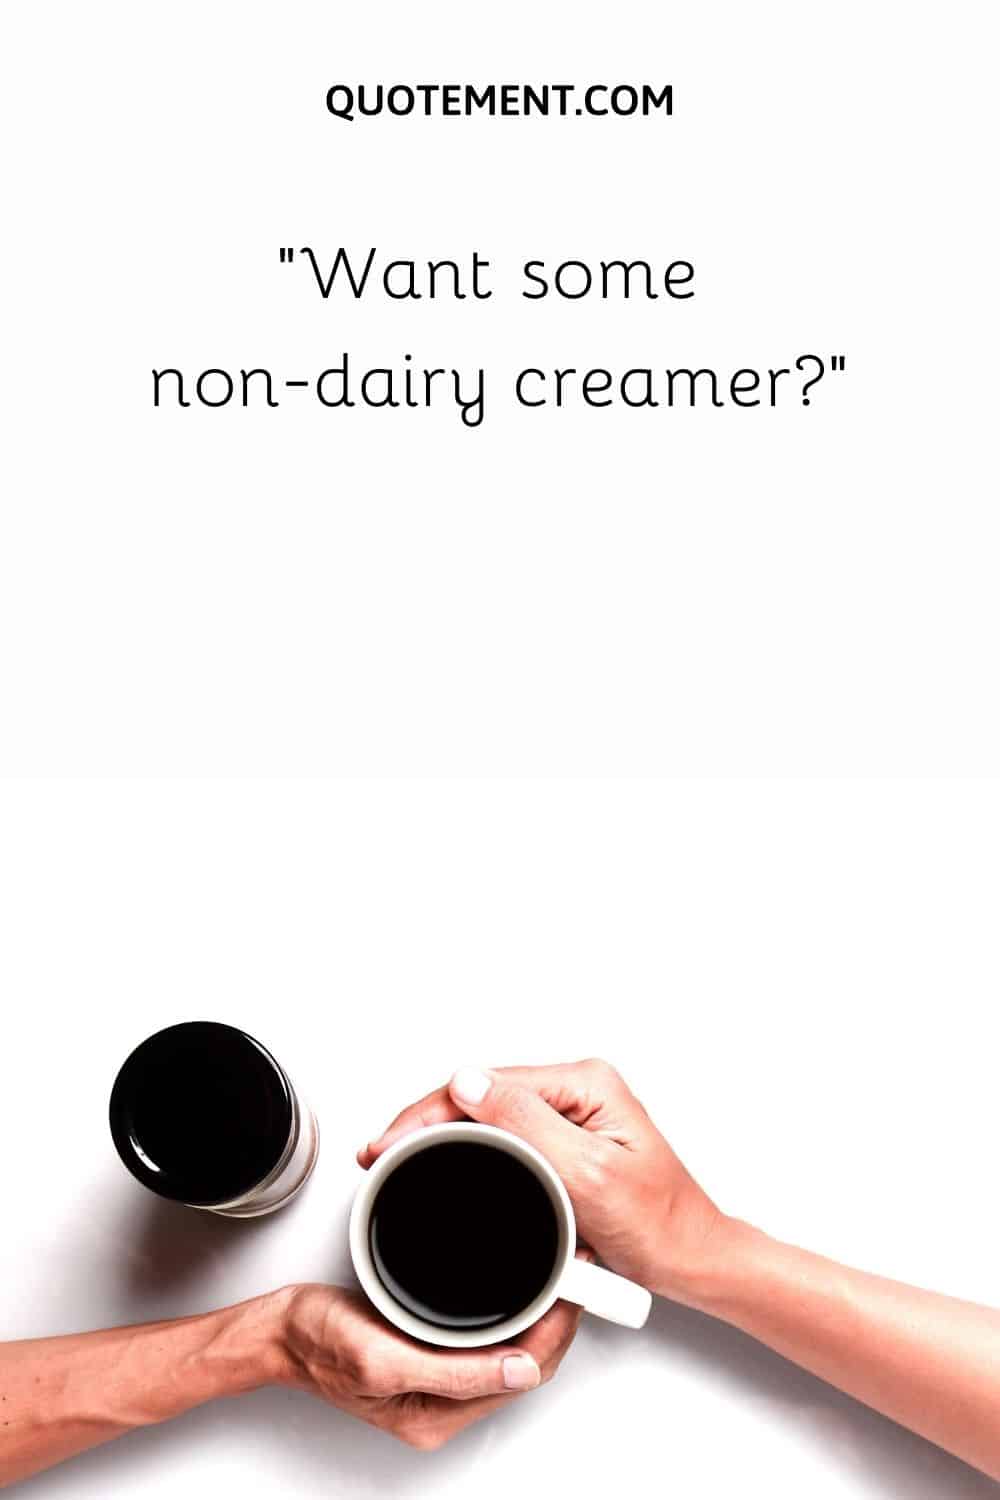 Want some non-dairy creamer